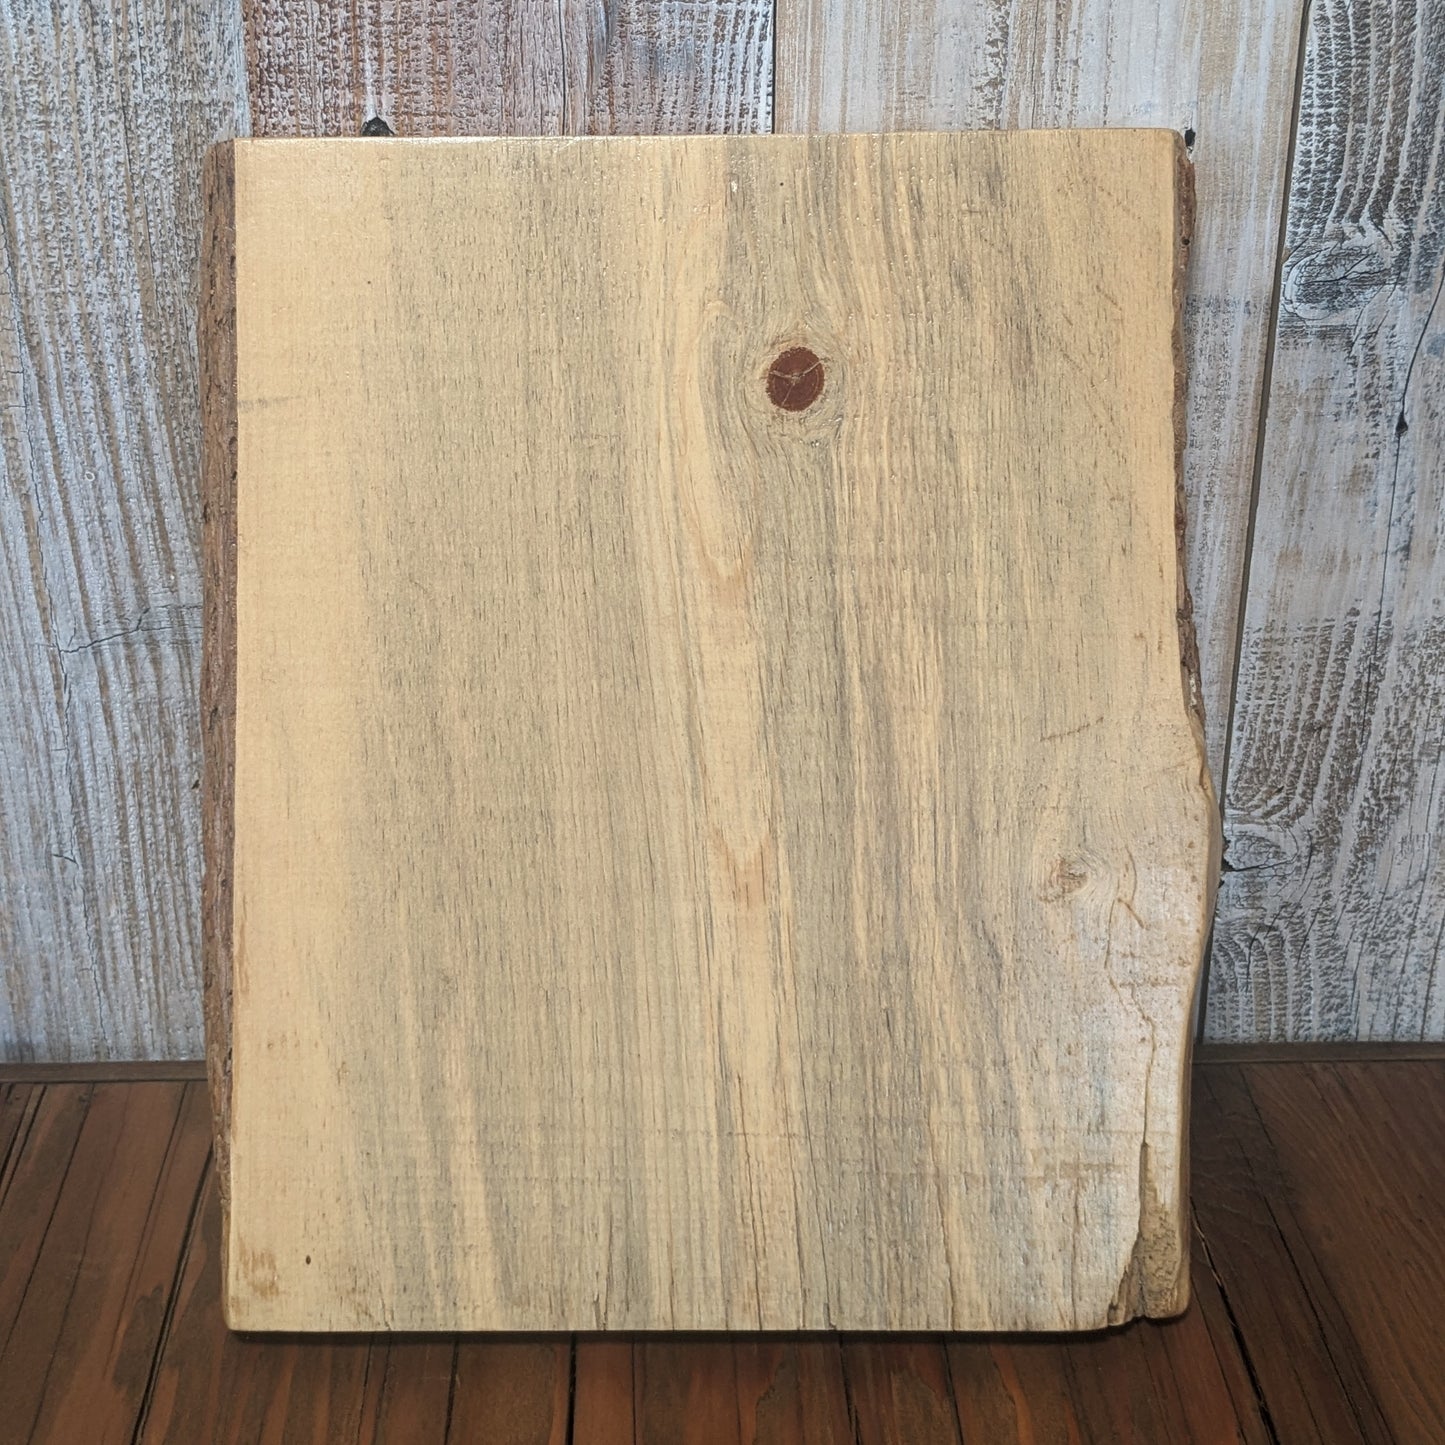 Beetle Kill Board with Bark Accents